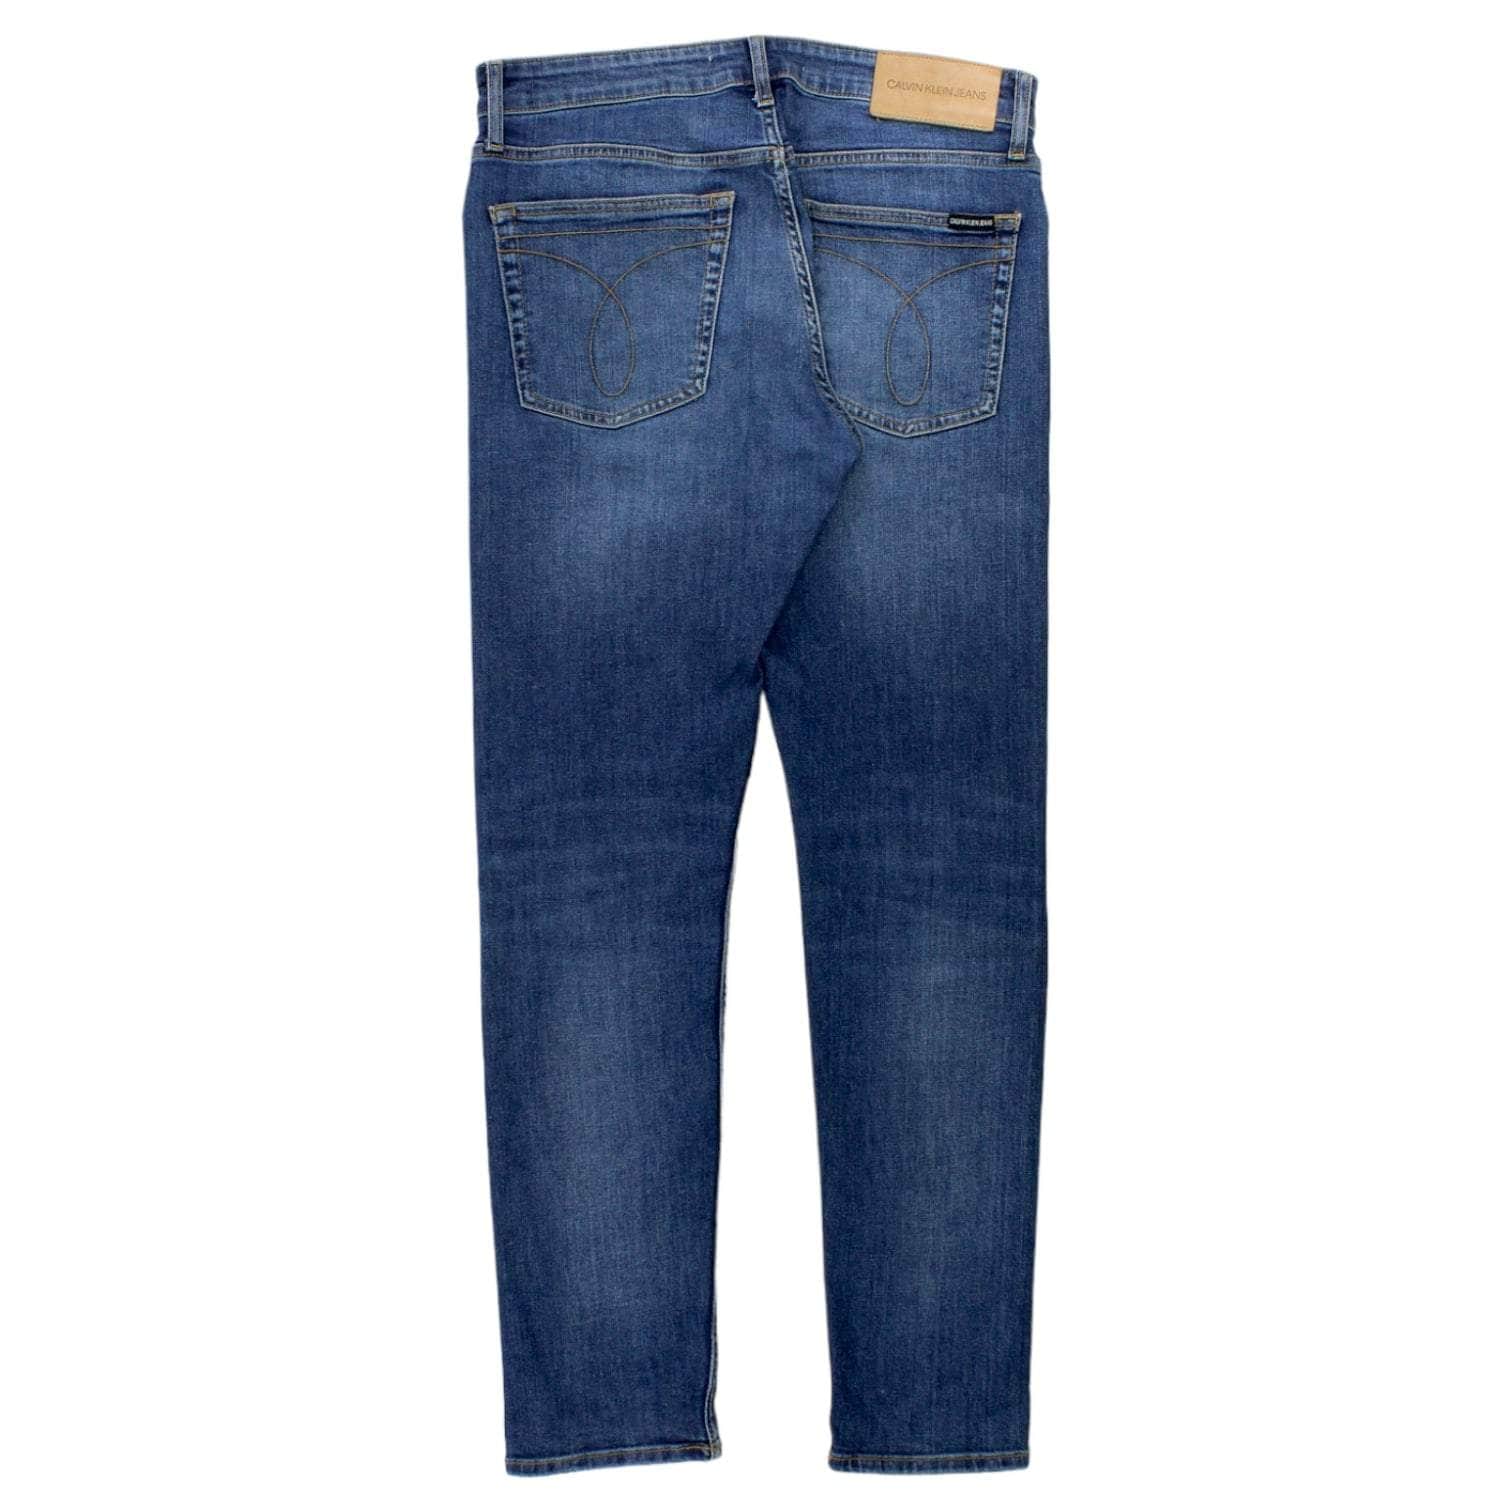 Calvin Klein Blue Faded Straight Fit Jeans